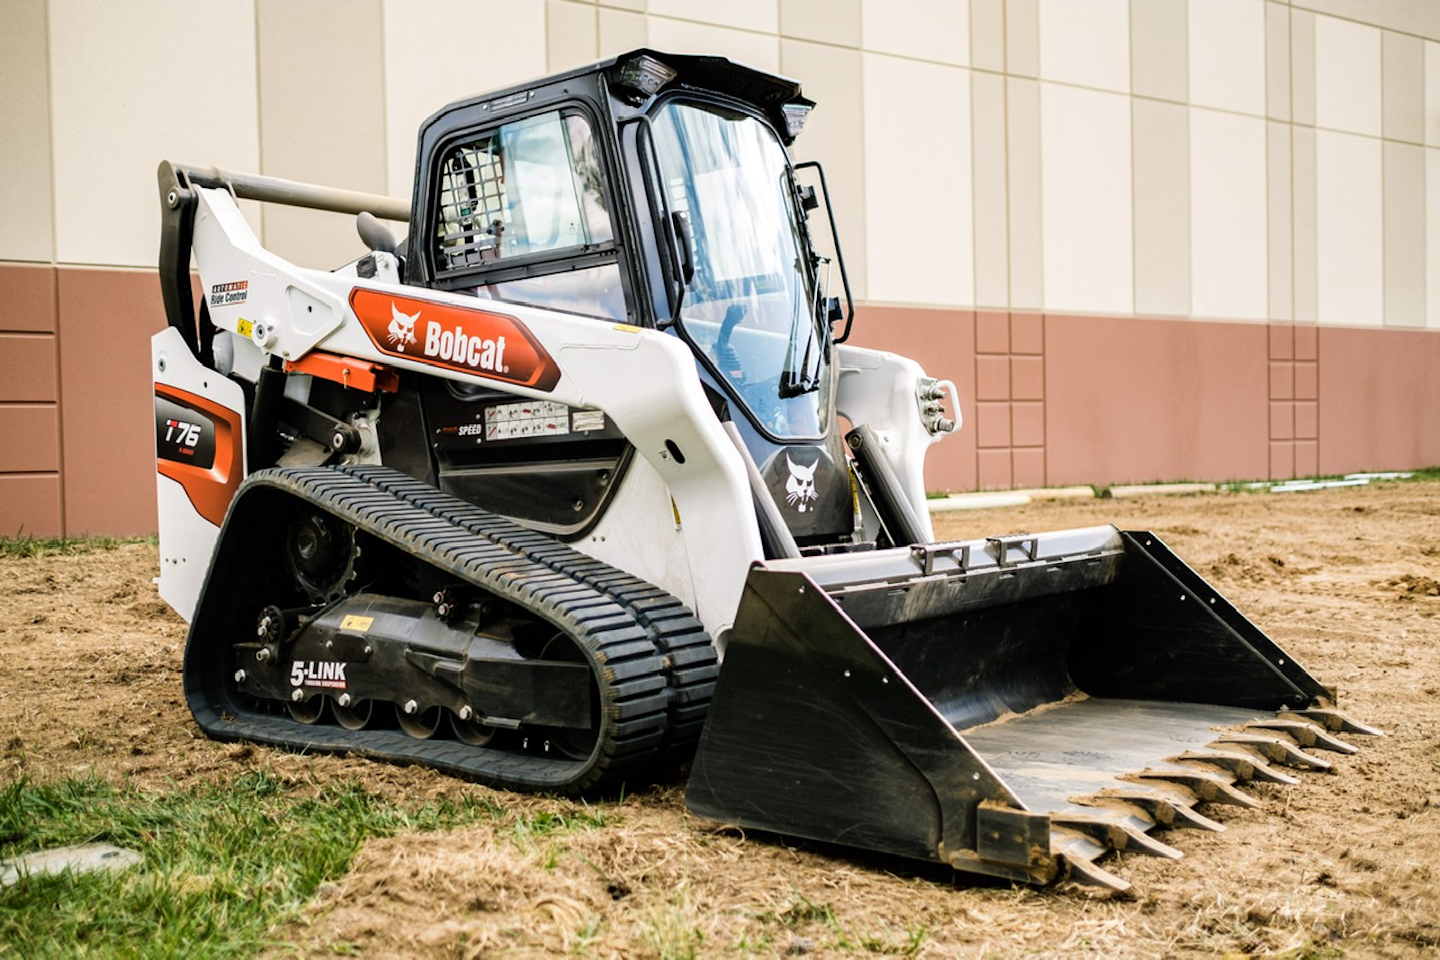 Bobcat’s new RSeries skidsteers and CTLs are its toughest and most